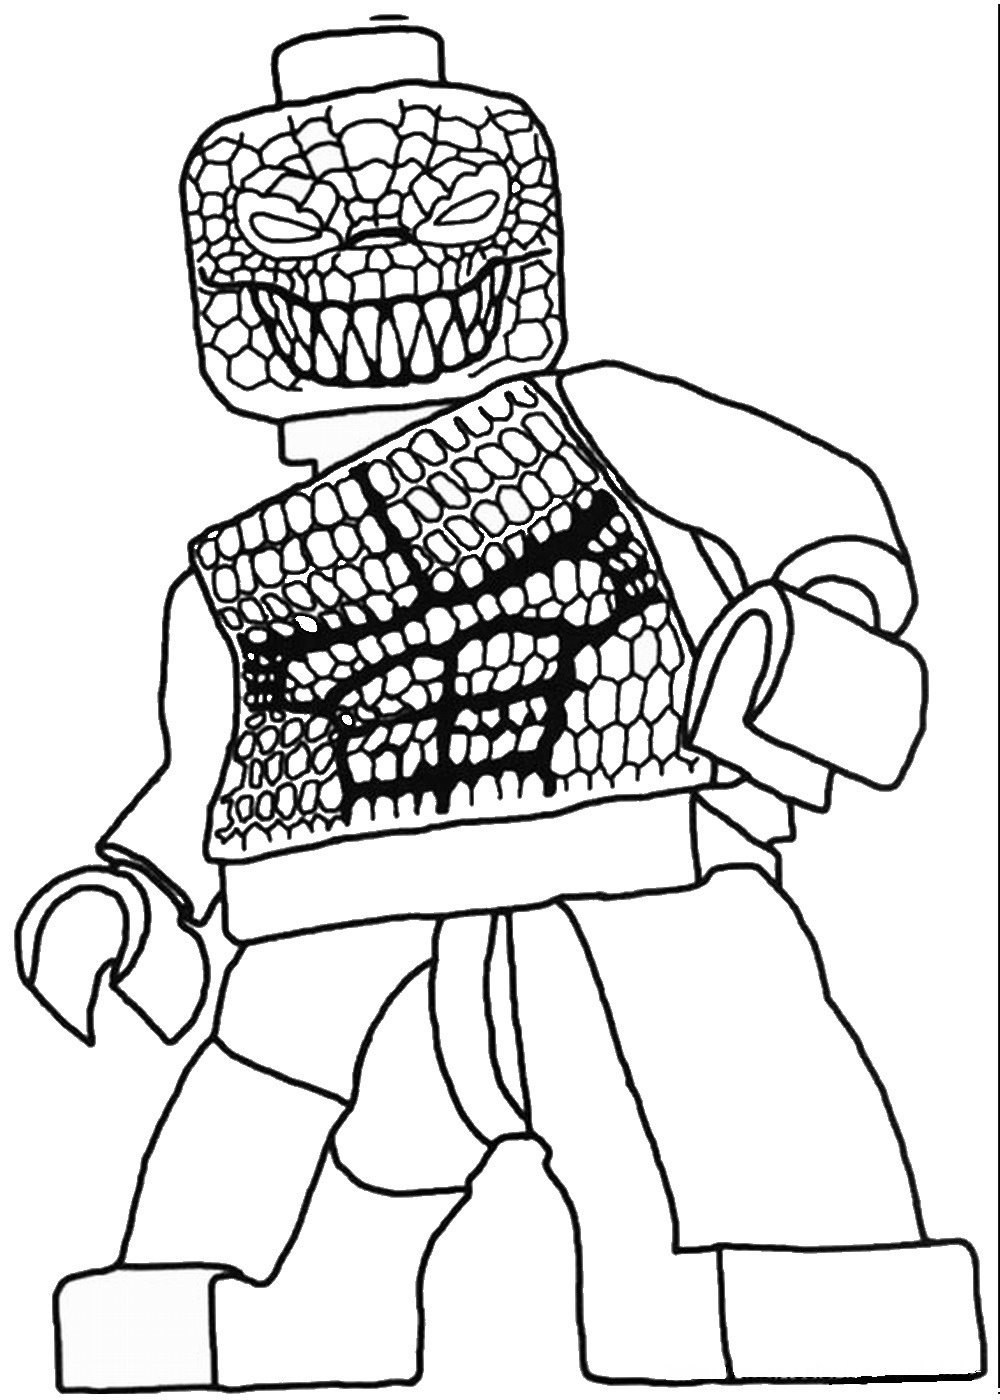 Lego Batman Coloring Pages Free Printable - Printable Word Searches